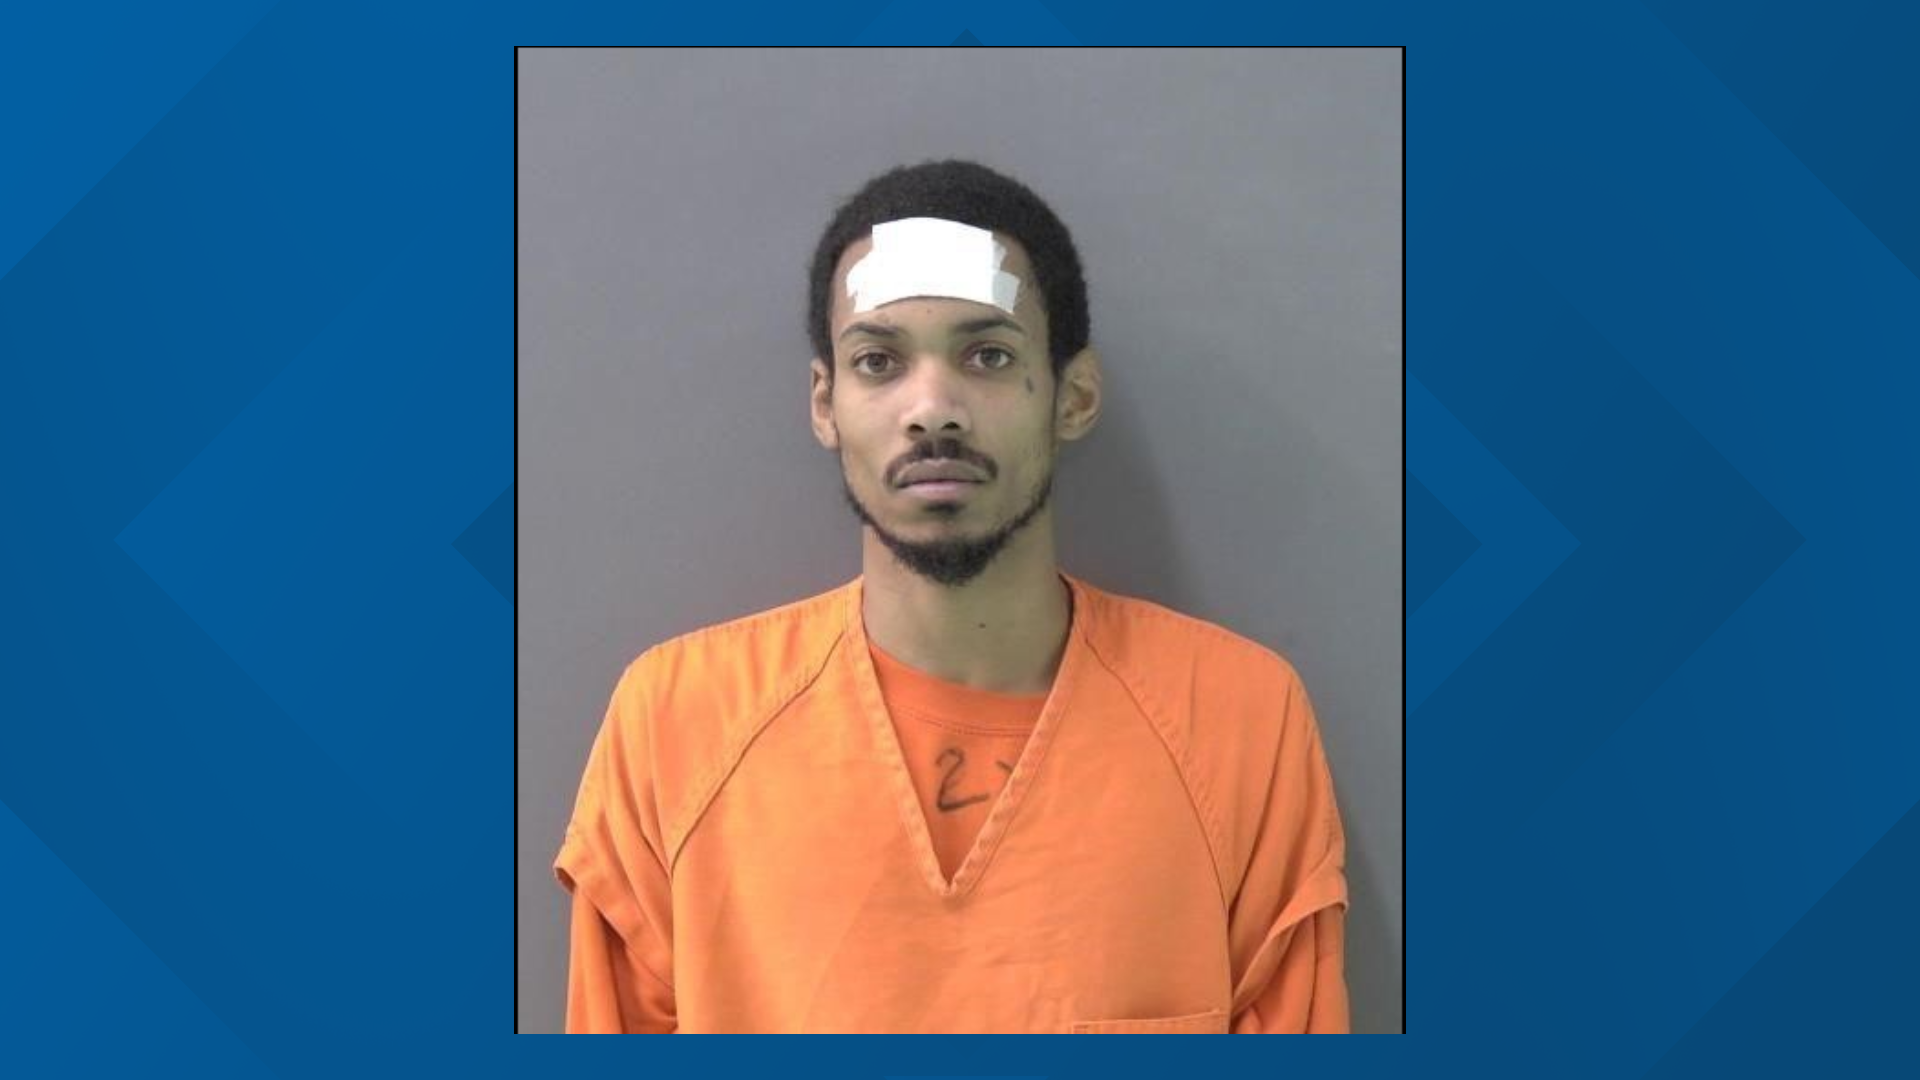 Torries Akheem DeQuan Terry was charged with aggravated assault with a deadly weapon with serious bodily injury against a family member after stabbing his girlfriend